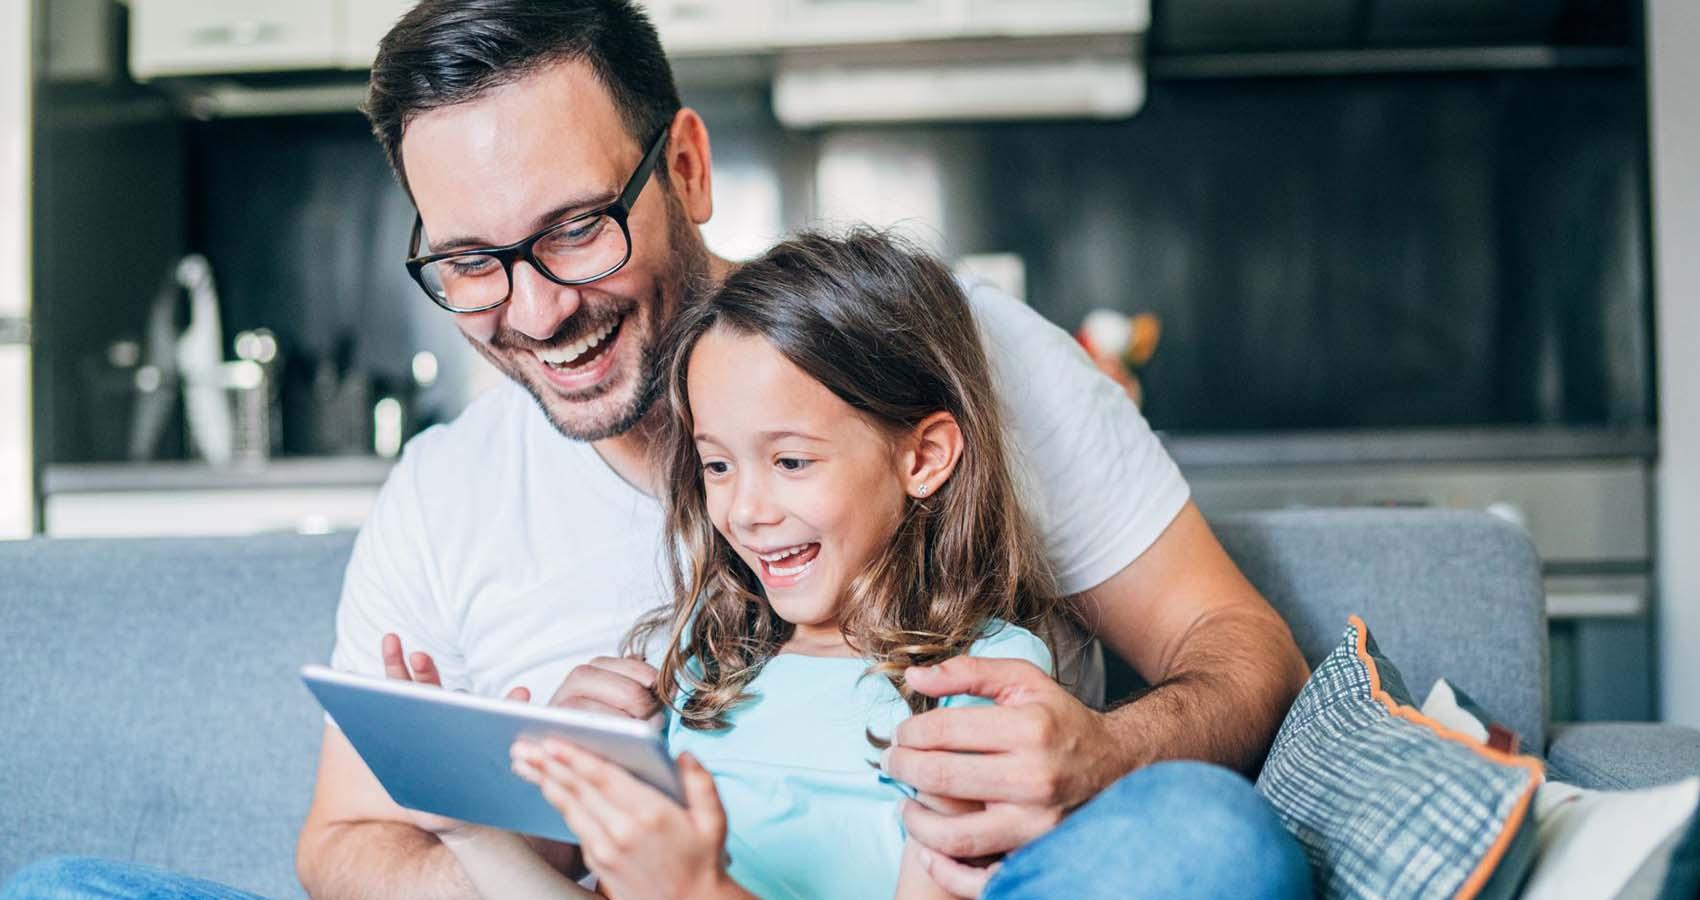 stock photo of father and daughter looking at tablet